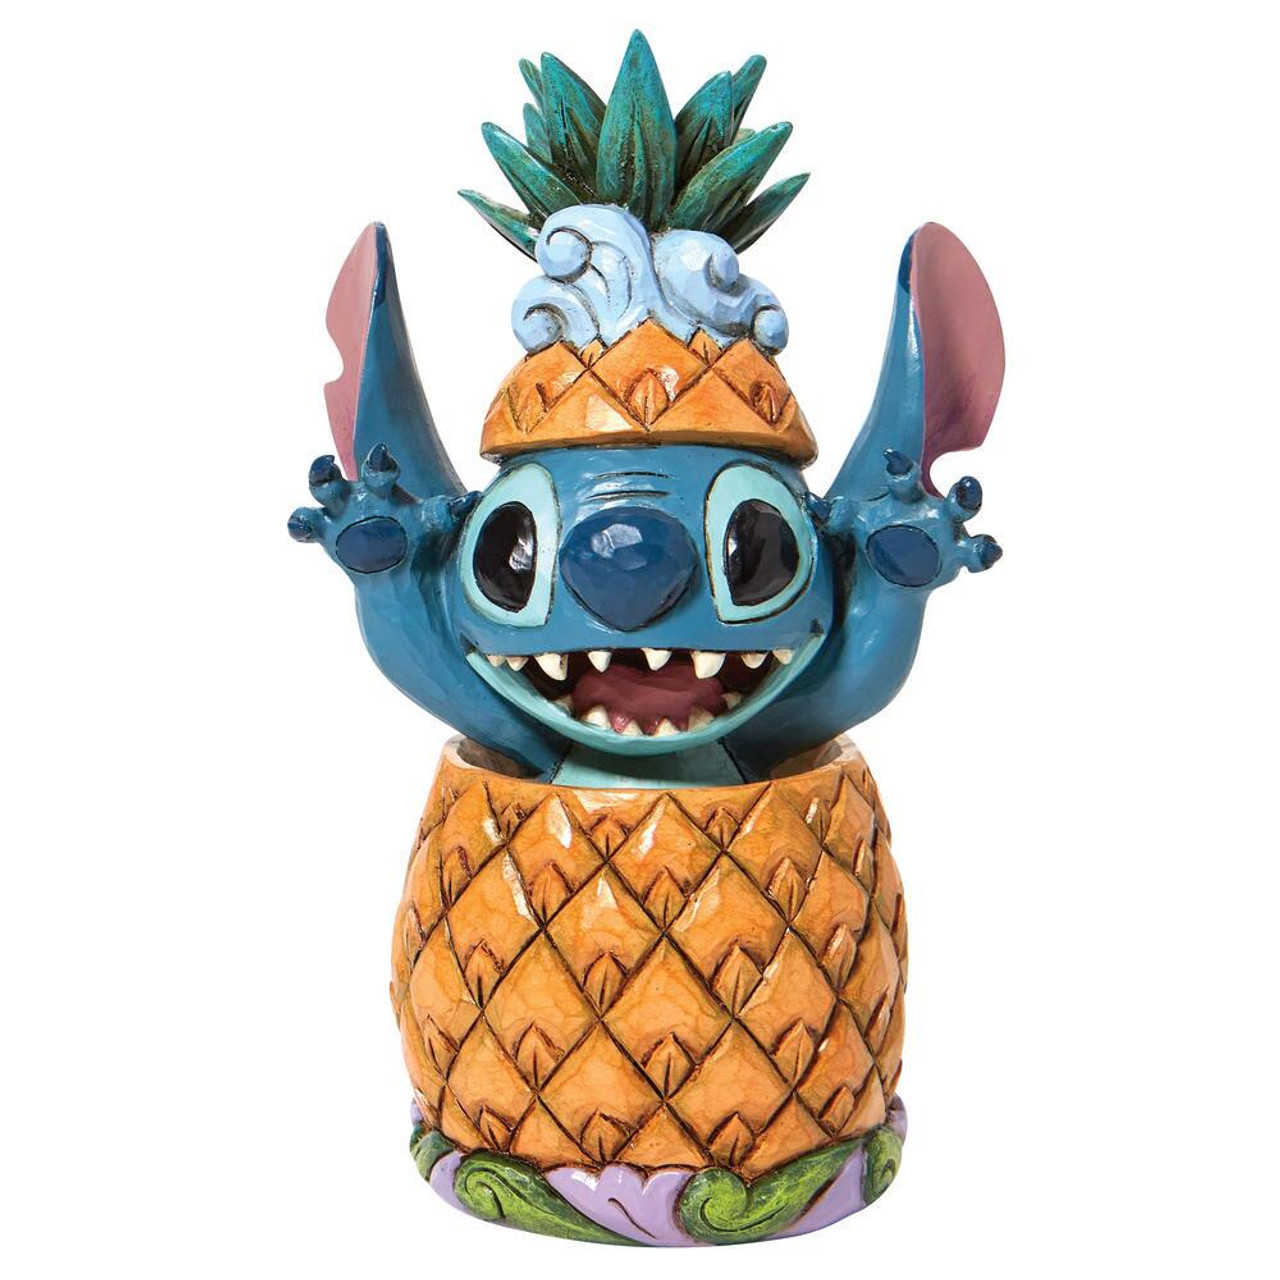 Lilo & STITCH in PINEAPPLE PAL Jim Shore Disney Traditions Figure -  O'Smiley's Dolls & Collectibles, LLC